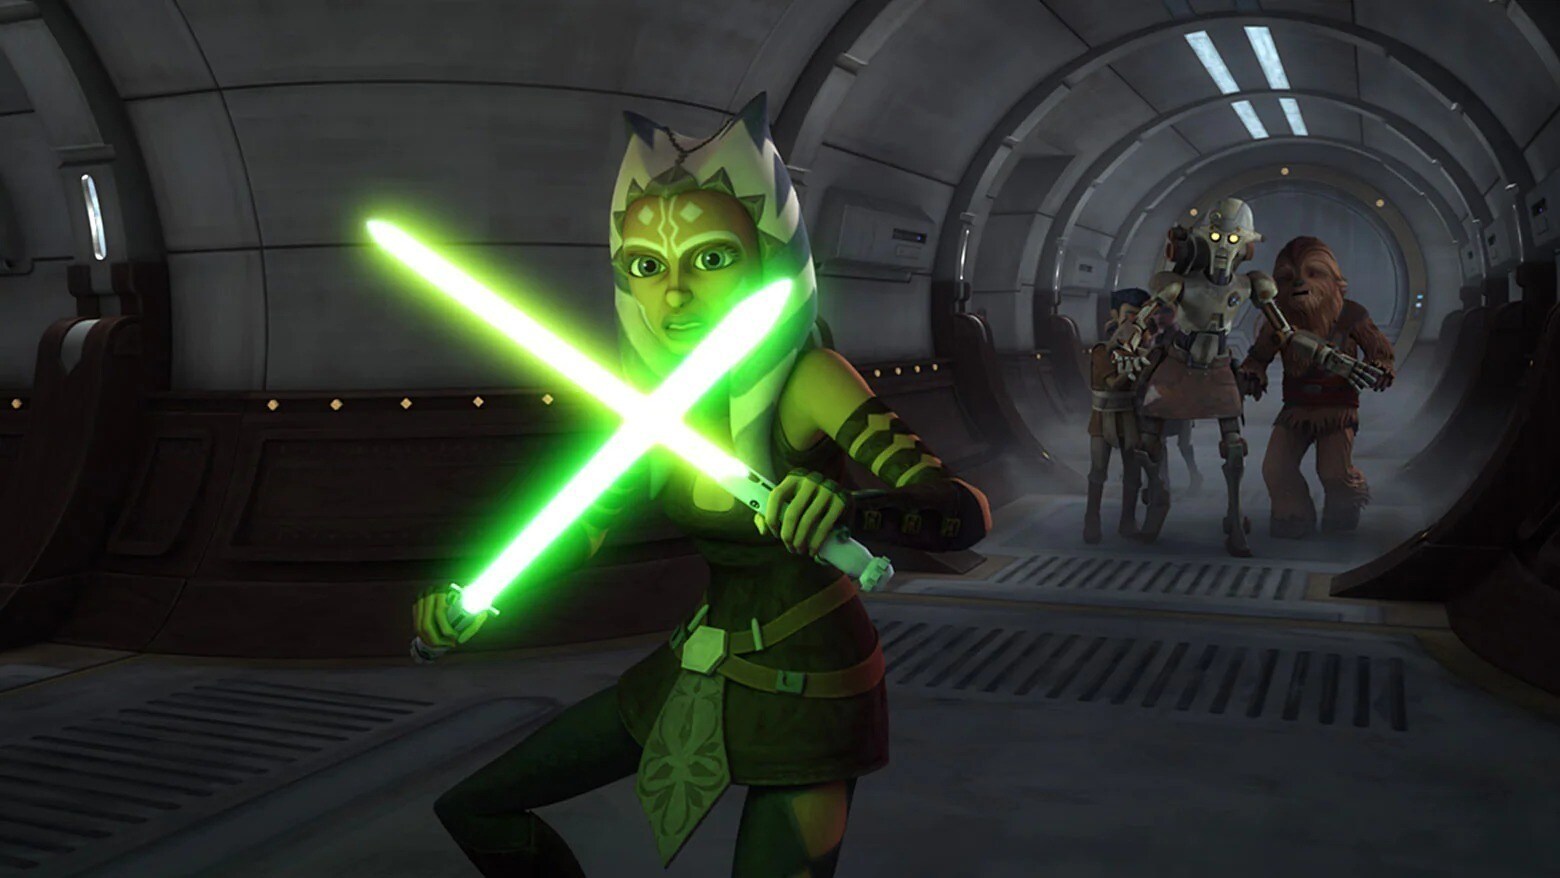 Ahsoka wielding two green lightsabers to protect younglings in The Clone Wars